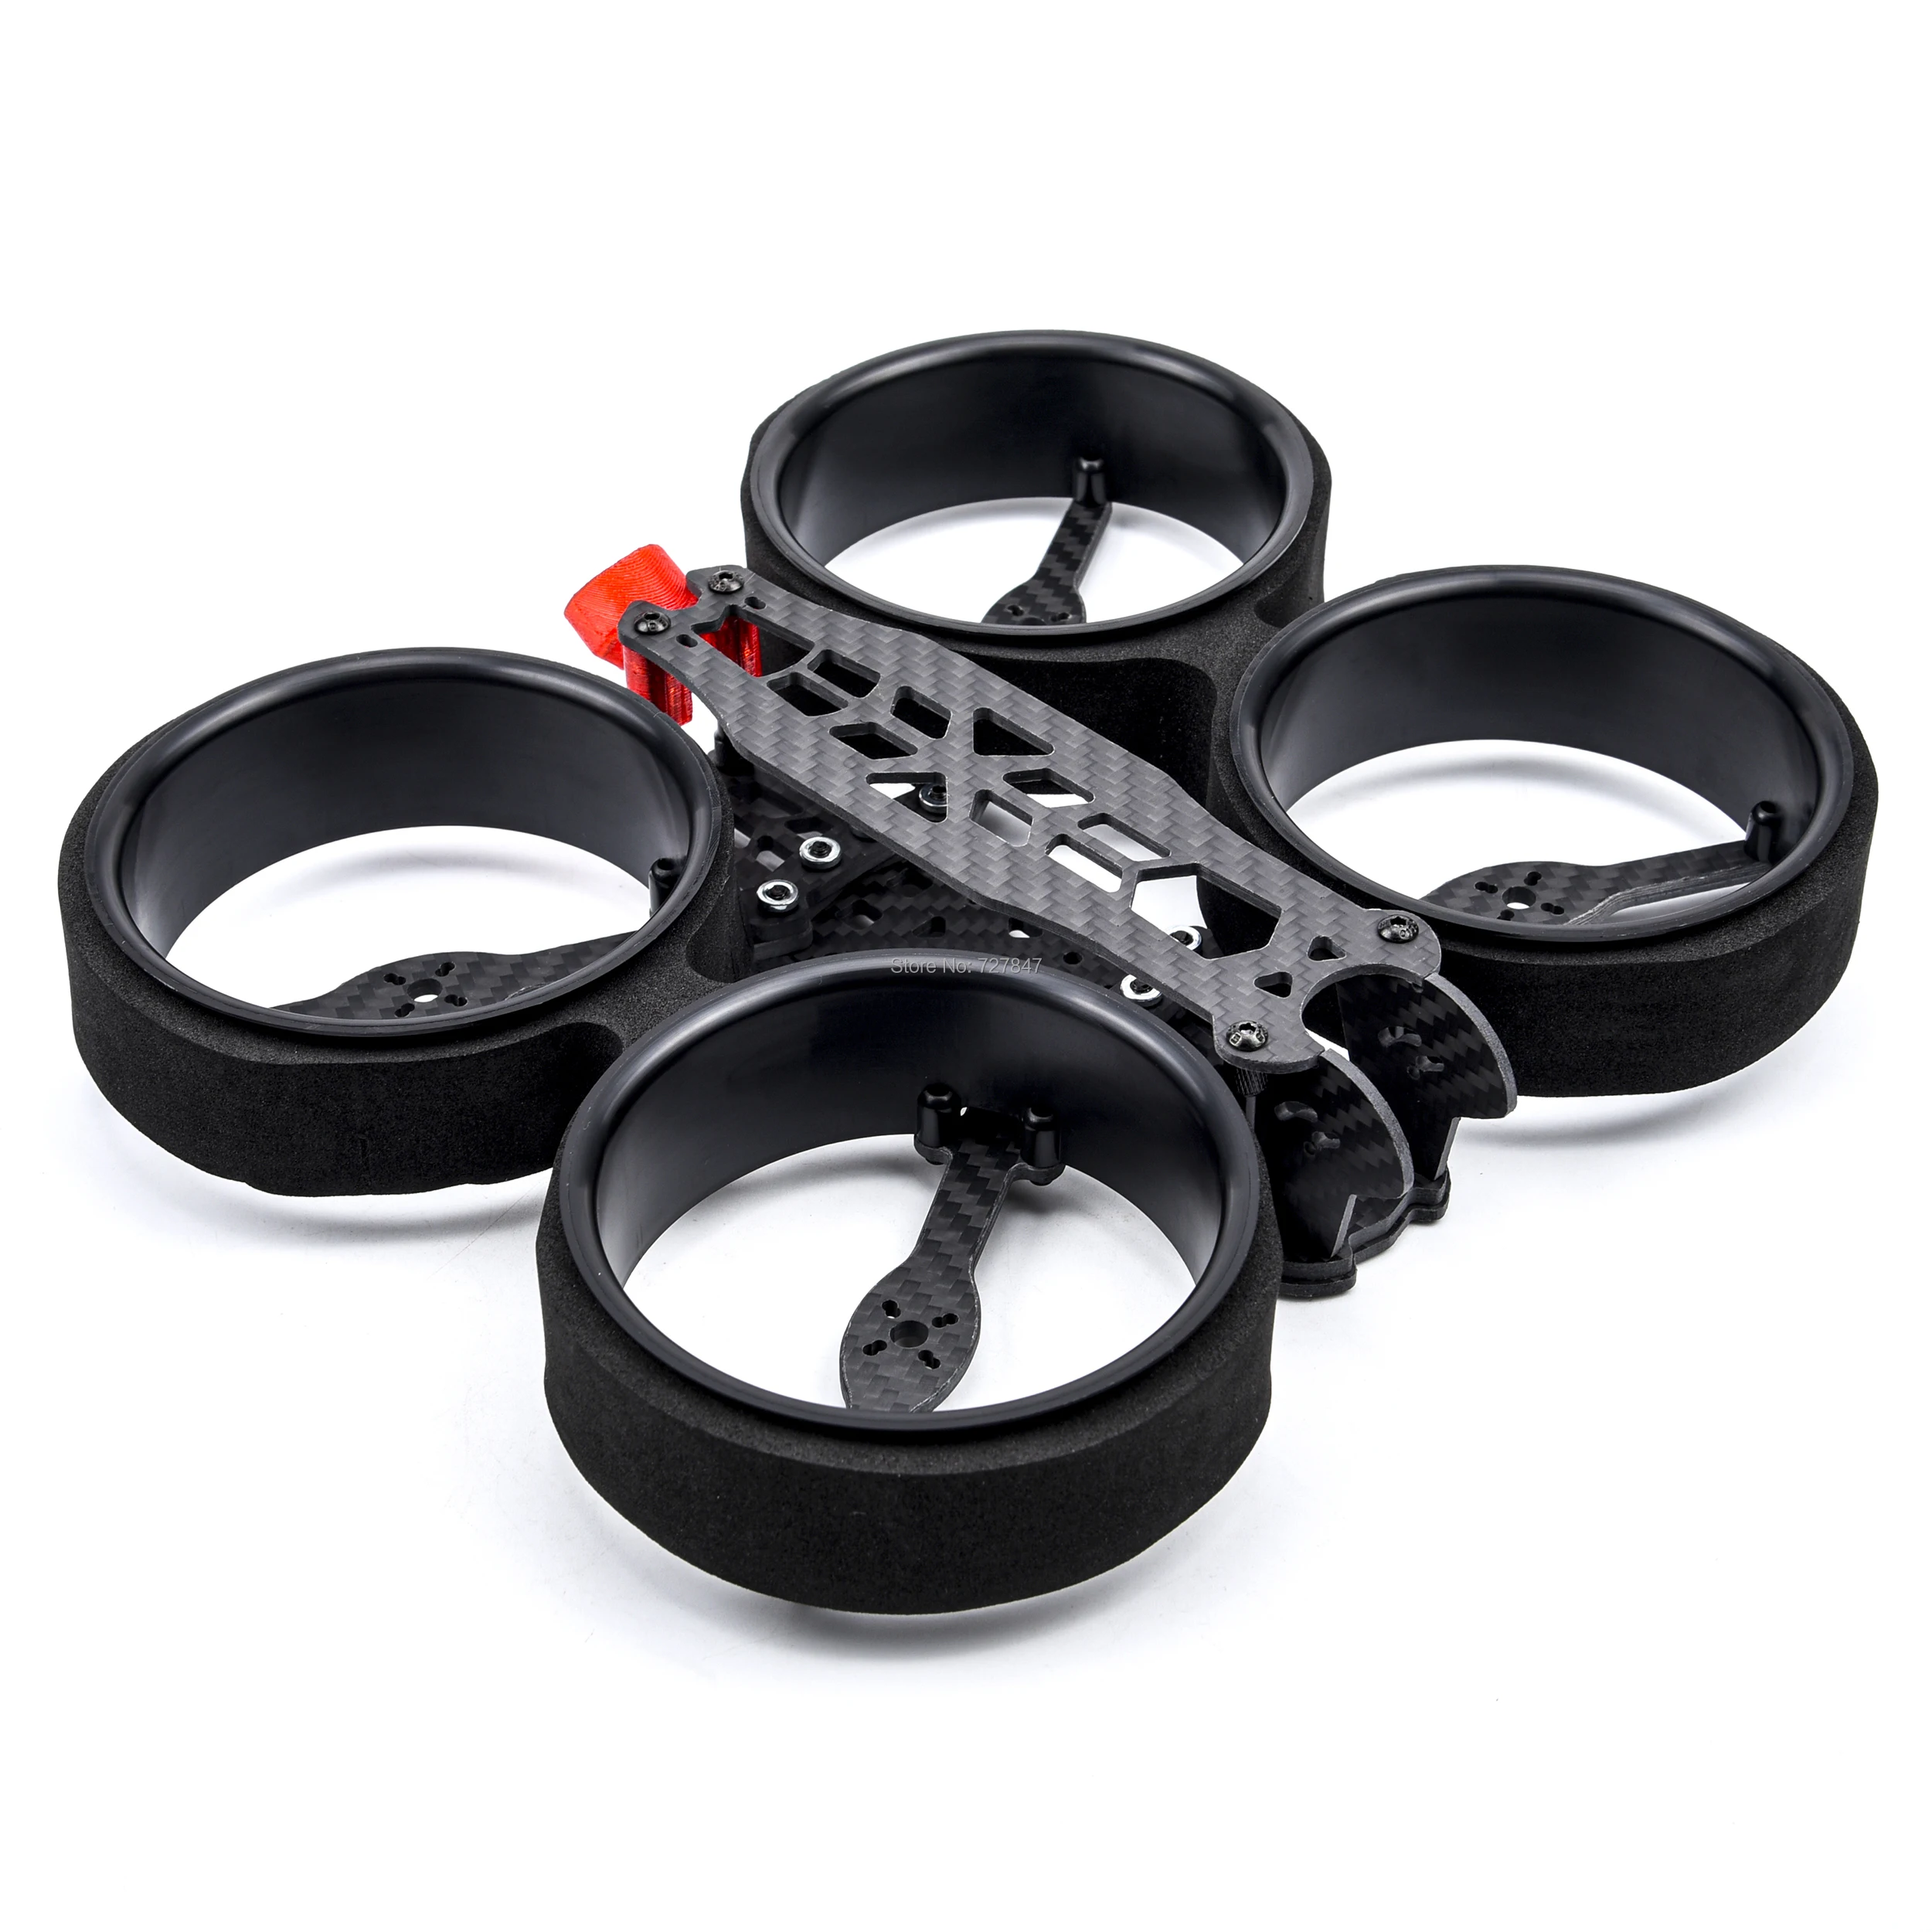 Brave 163 163mm 3 inch with TPU 3D Printing Parts FPV Racing Drone Quadcopter Freestyle Frame support 1306 1408 1506 Motor